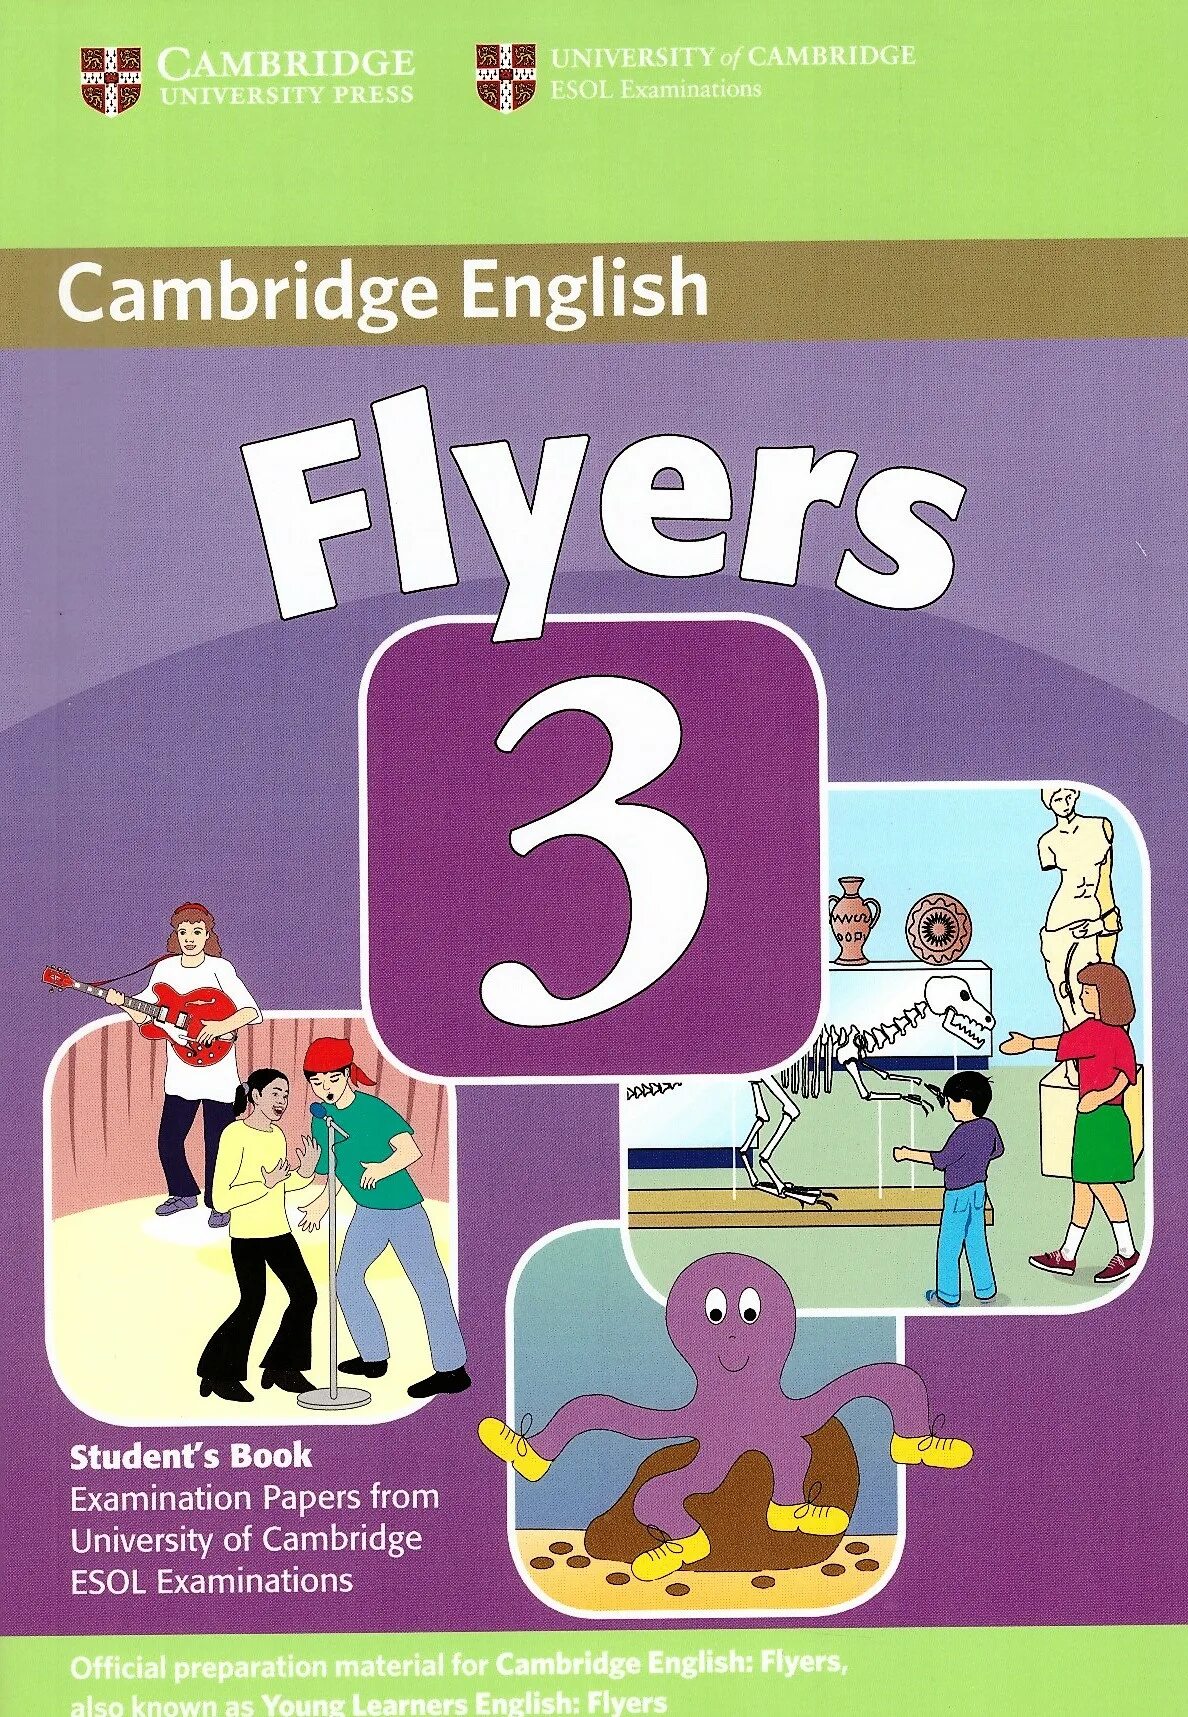 Learning english tests. Cambridge English young Learners Tests 8 / Flyers / student's book. Flyers Cambridge учебник. Экзамен Flyers Cambridge. Книга young Learners English.